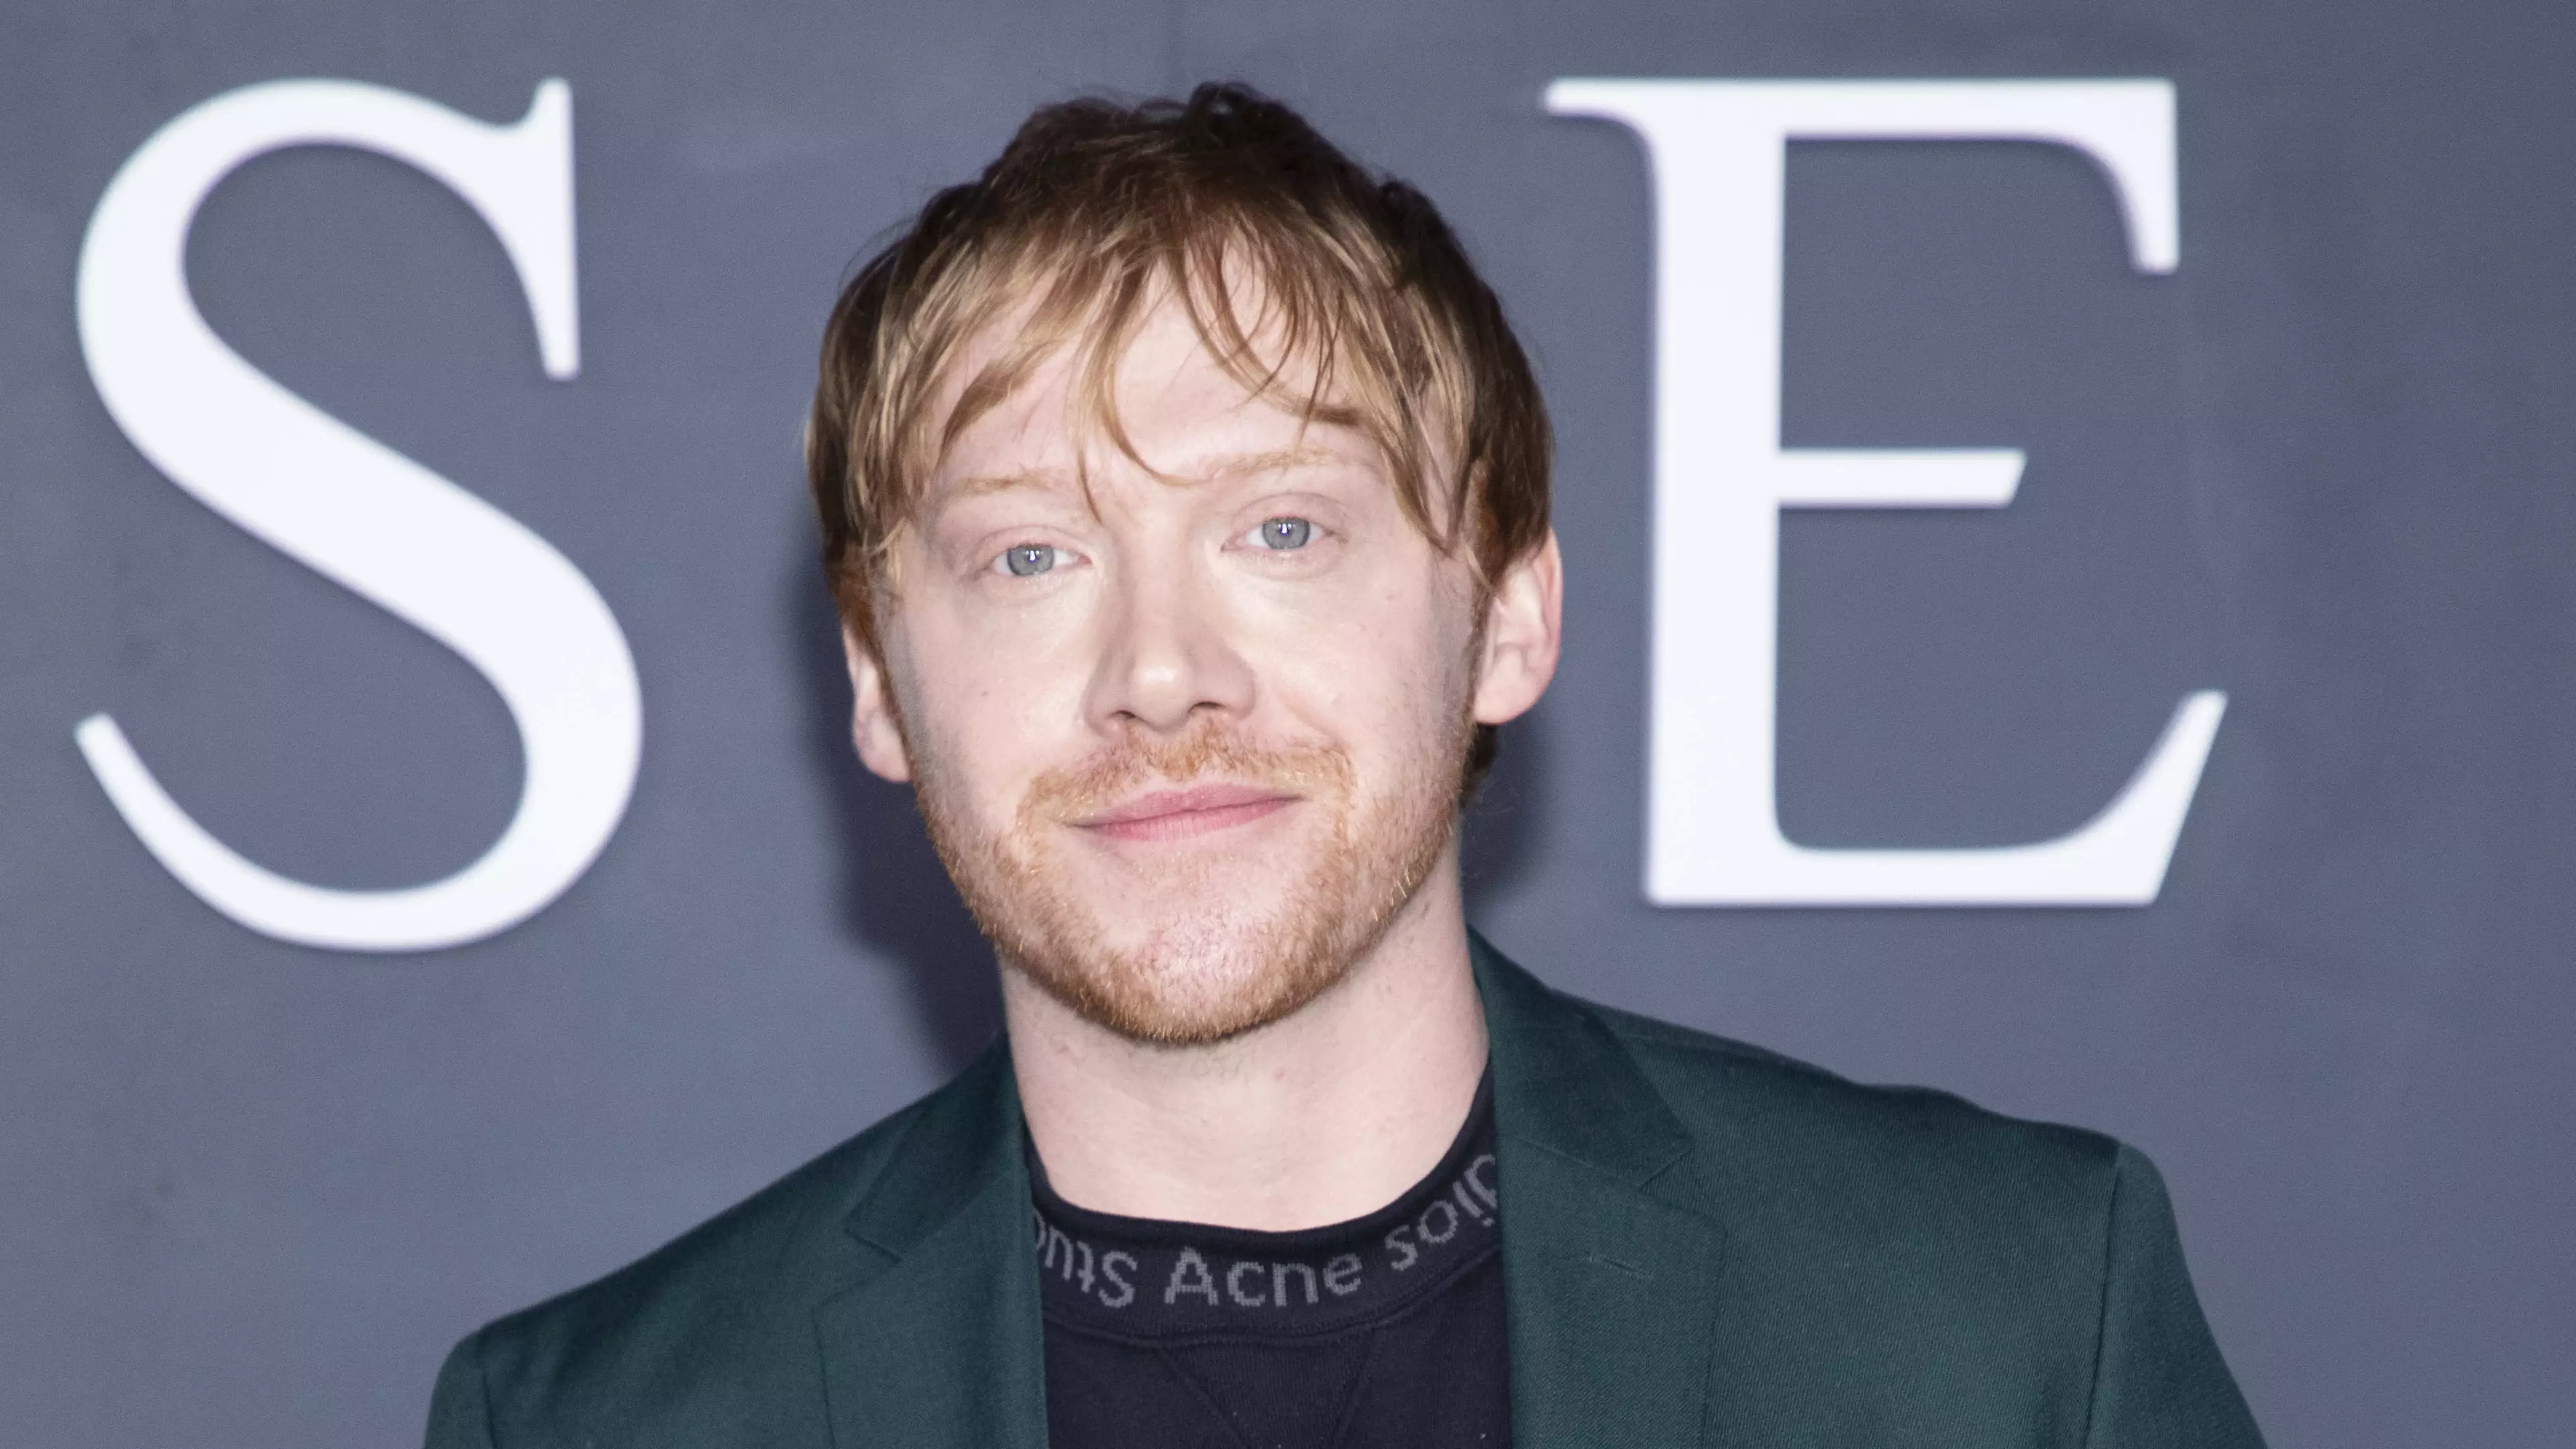 Rupert Grint And Georgia Groome Announce They're Expecting A Baby